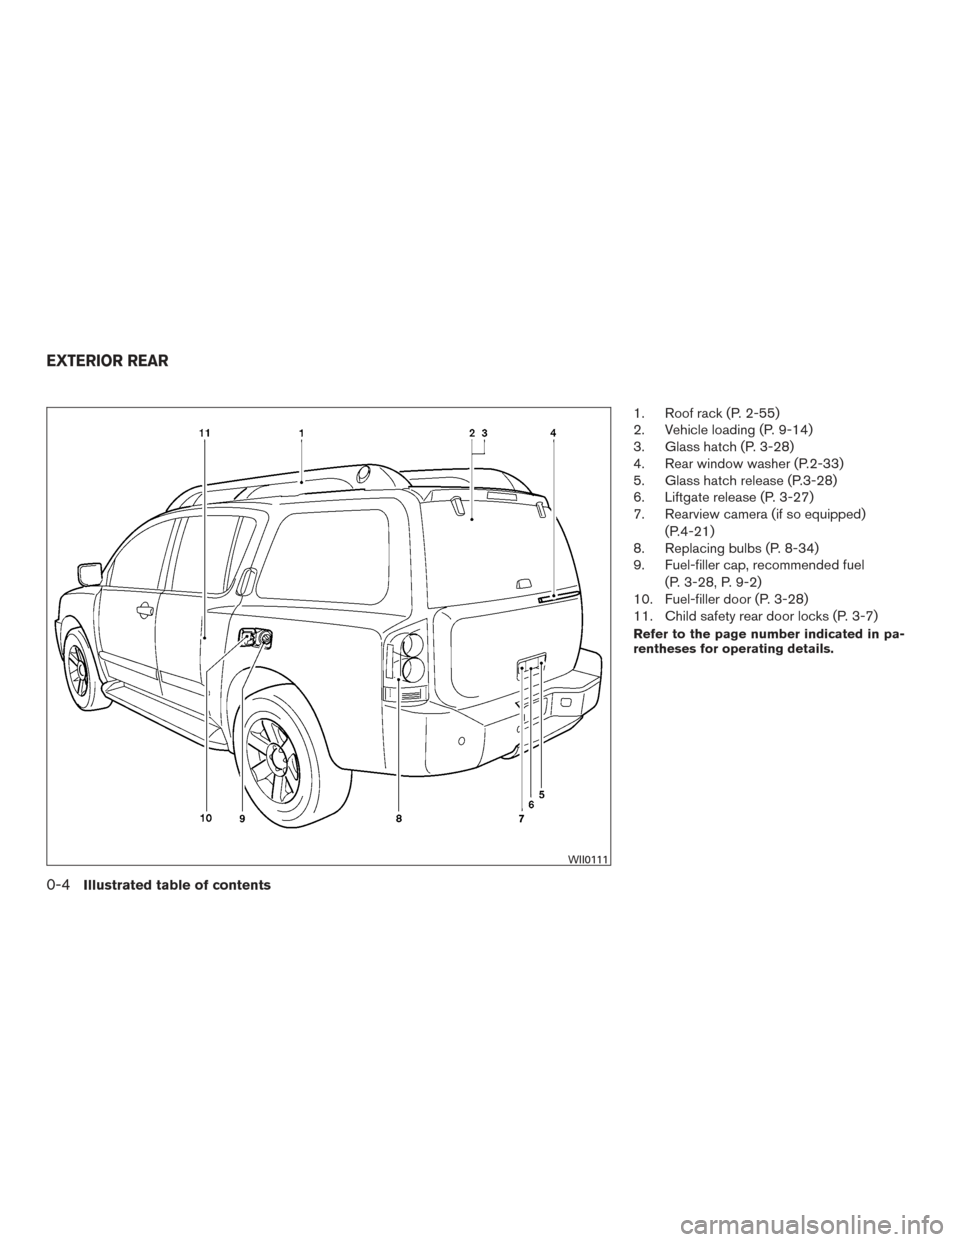 NISSAN ARMADA 2015 1.G User Guide 1. Roof rack (P. 2-55)
2. Vehicle loading (P. 9-14)
3. Glass hatch (P. 3-28)
4. Rear window washer (P.2-33)
5. Glass hatch release (P.3-28)
6. Liftgate release (P. 3-27)
7. Rearview camera (if so equi